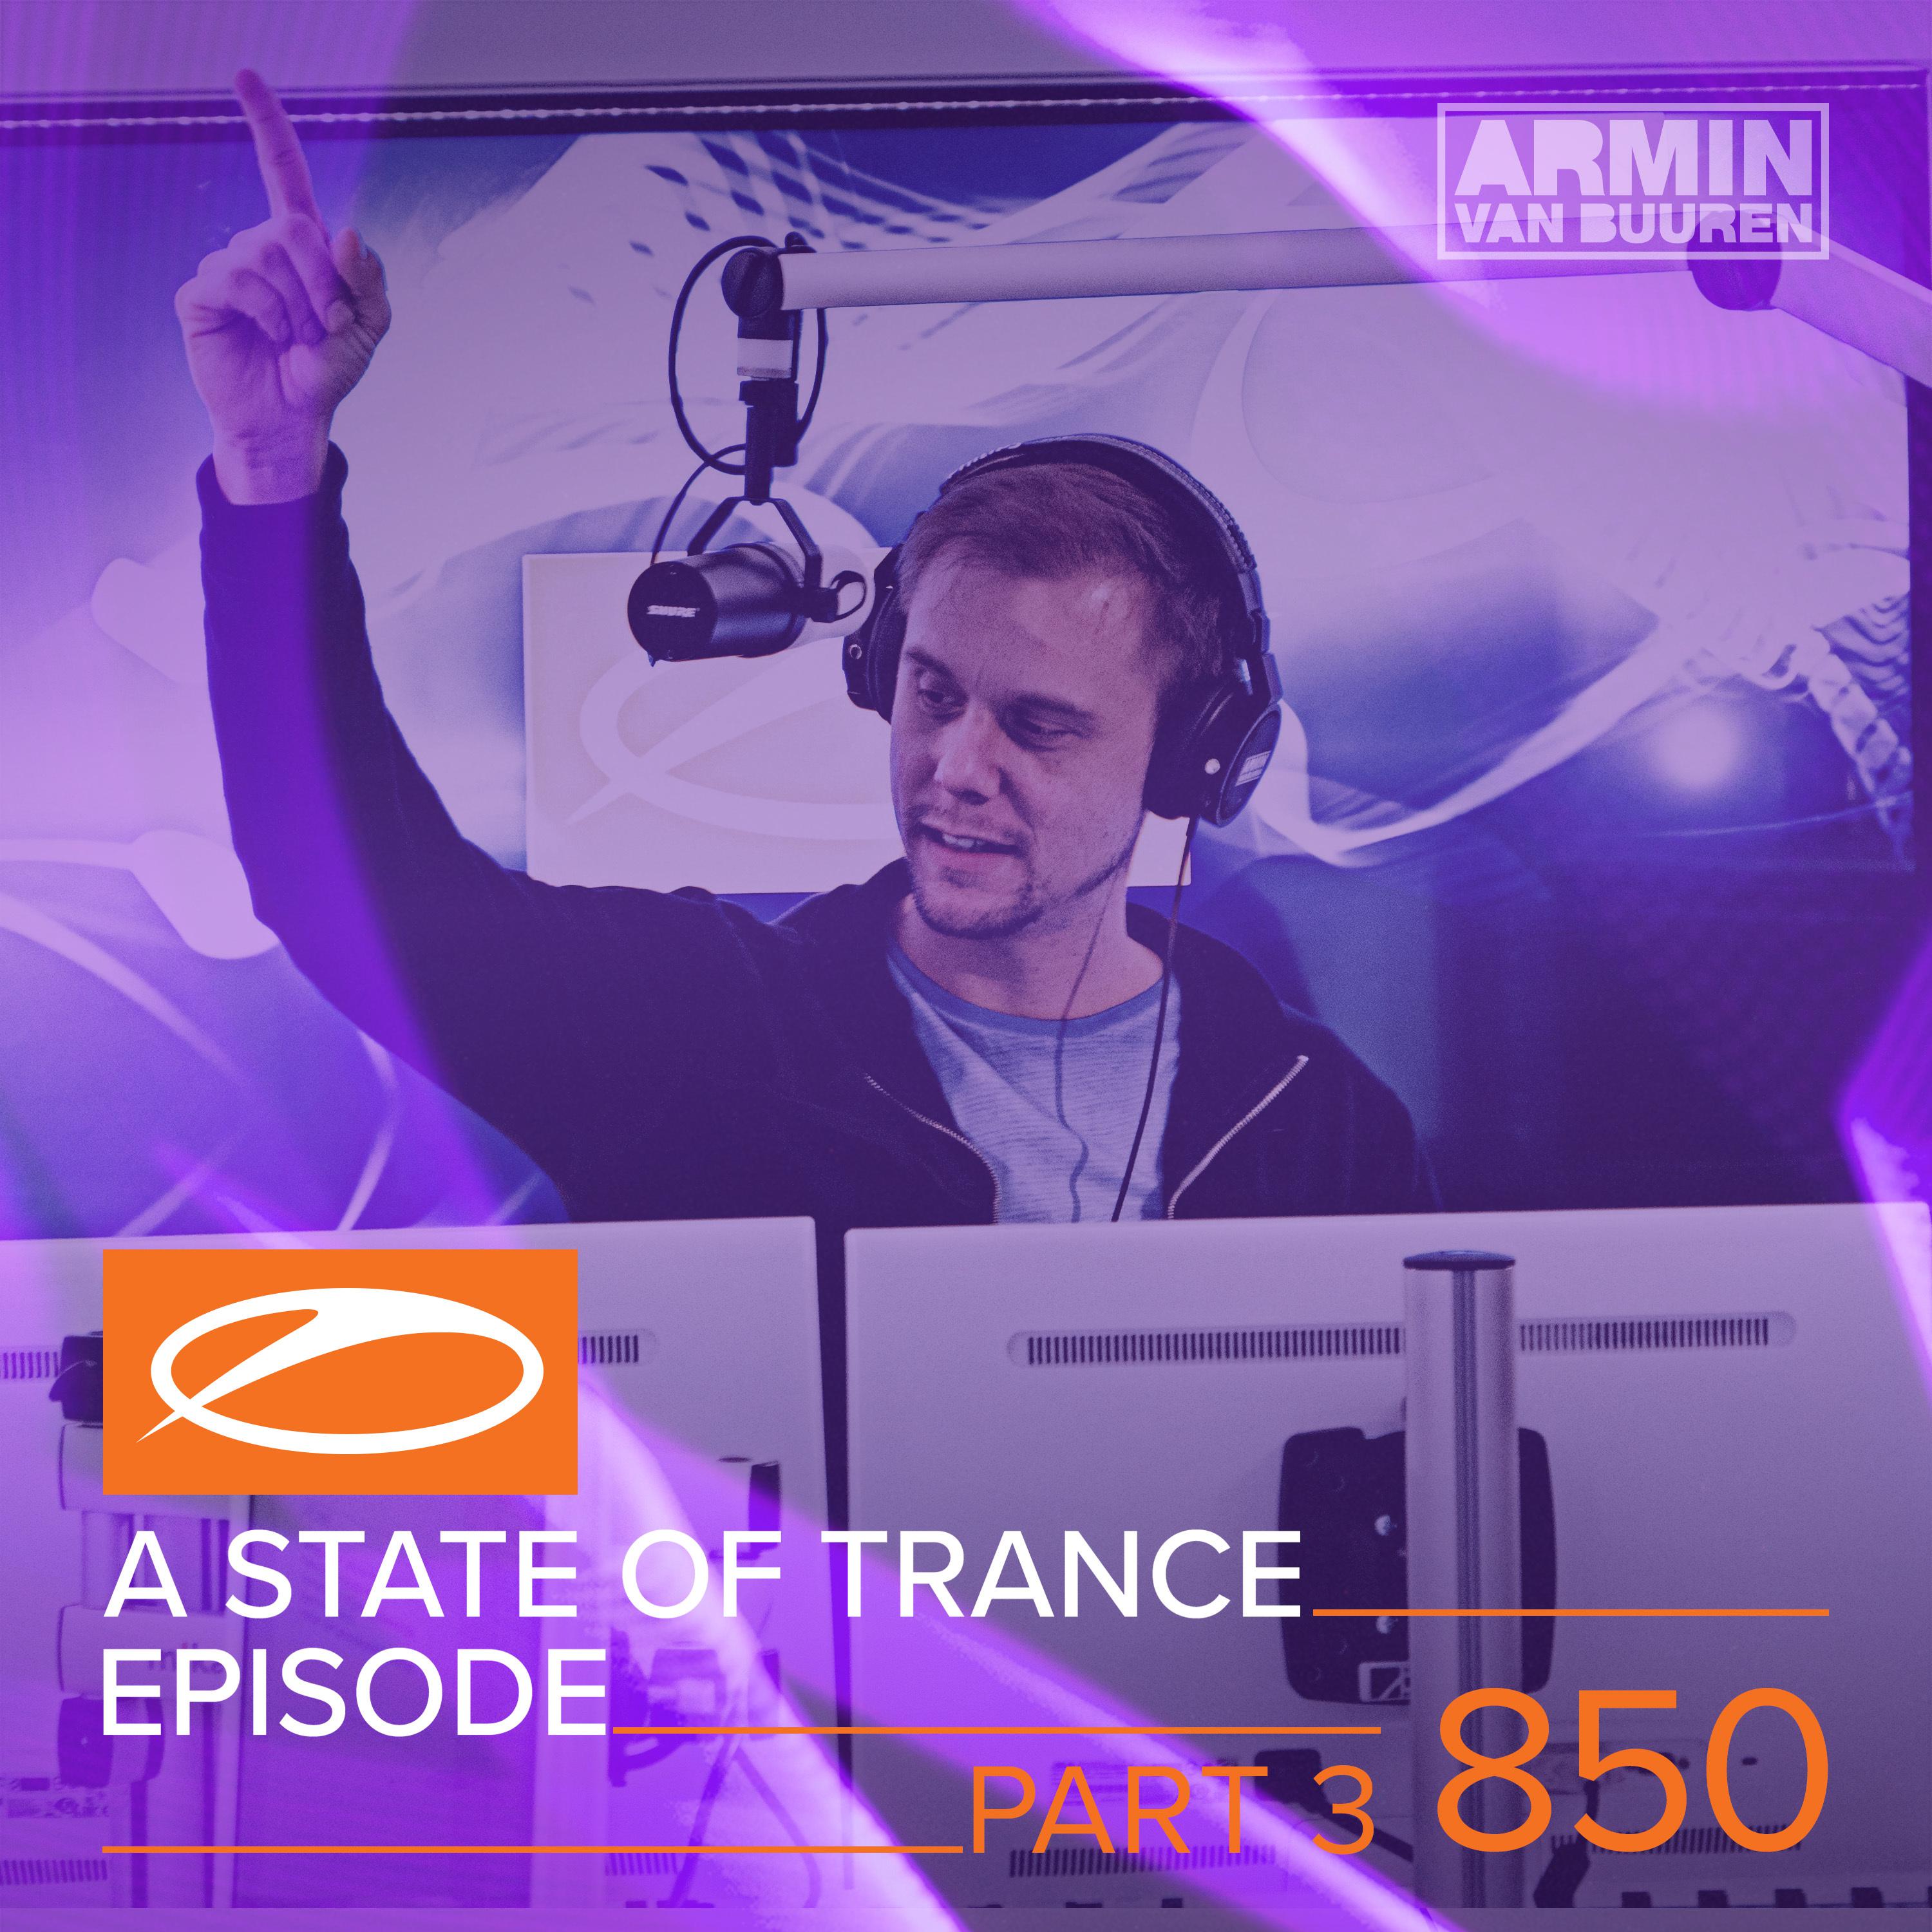 A State Of Trance Episode 850 (Part 3)